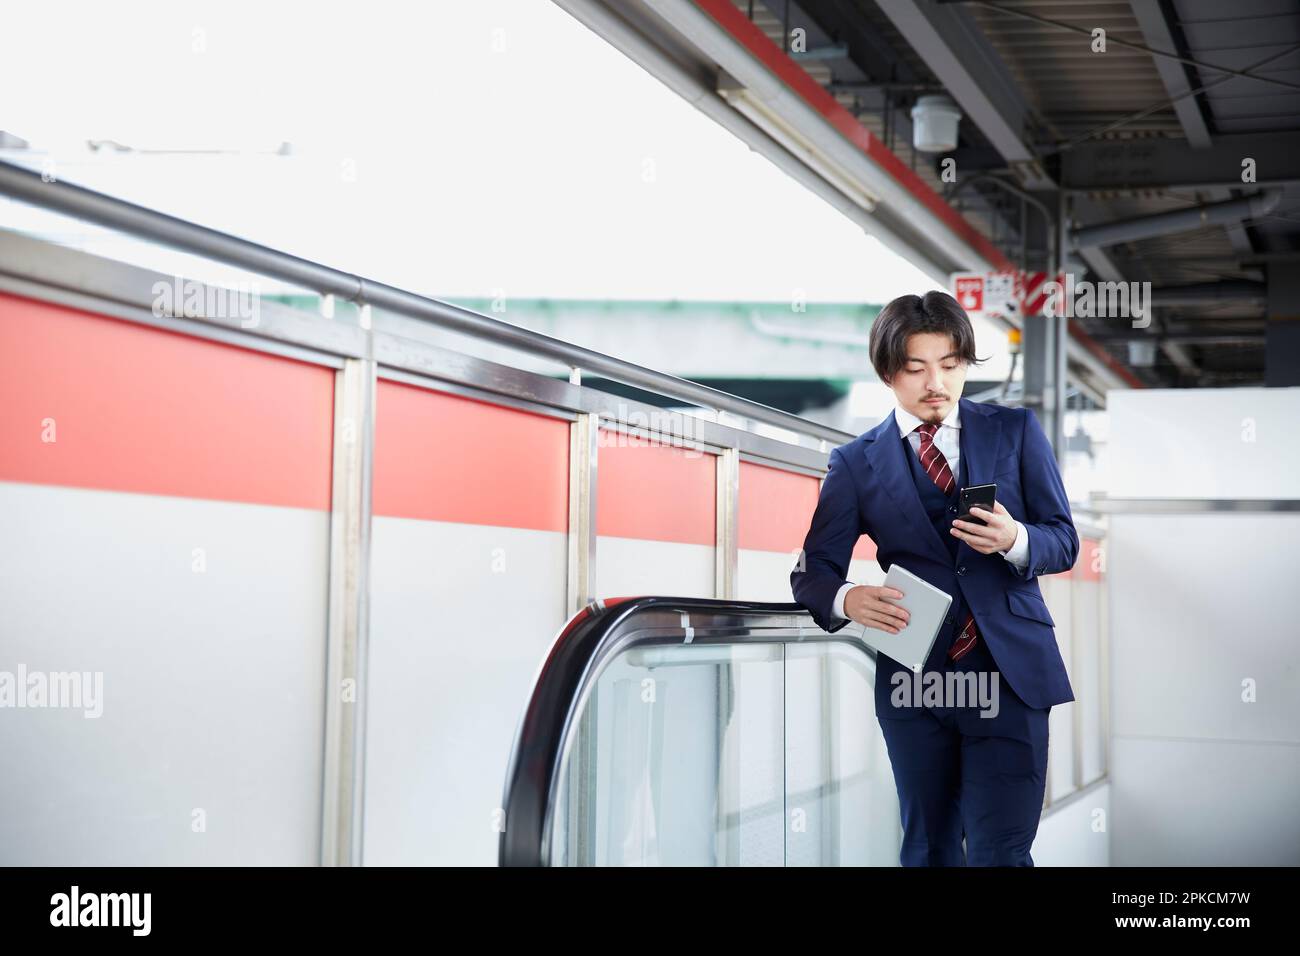 Man in suit looking at smartphone on escalator at train station Stock Photo